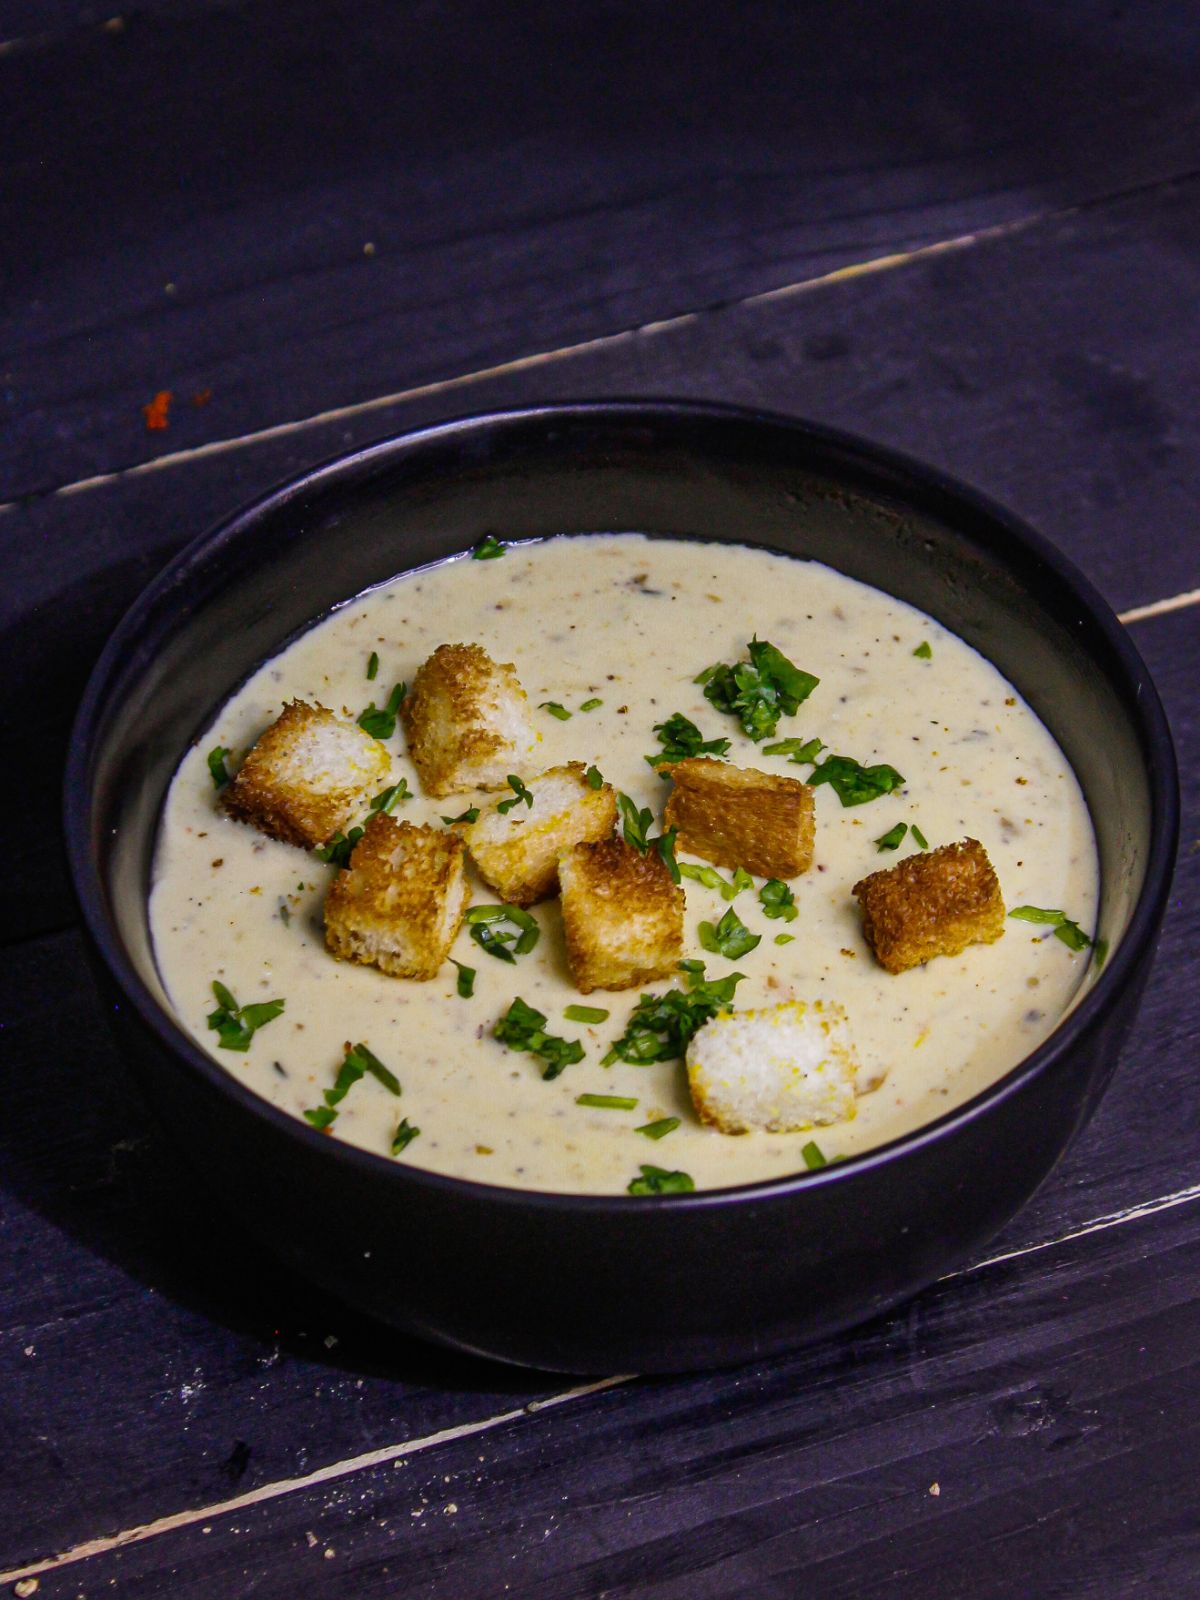 Garnish the Instant Pot Creamy Potato Soup with chopped coriander leaves and croutons and serve hot 